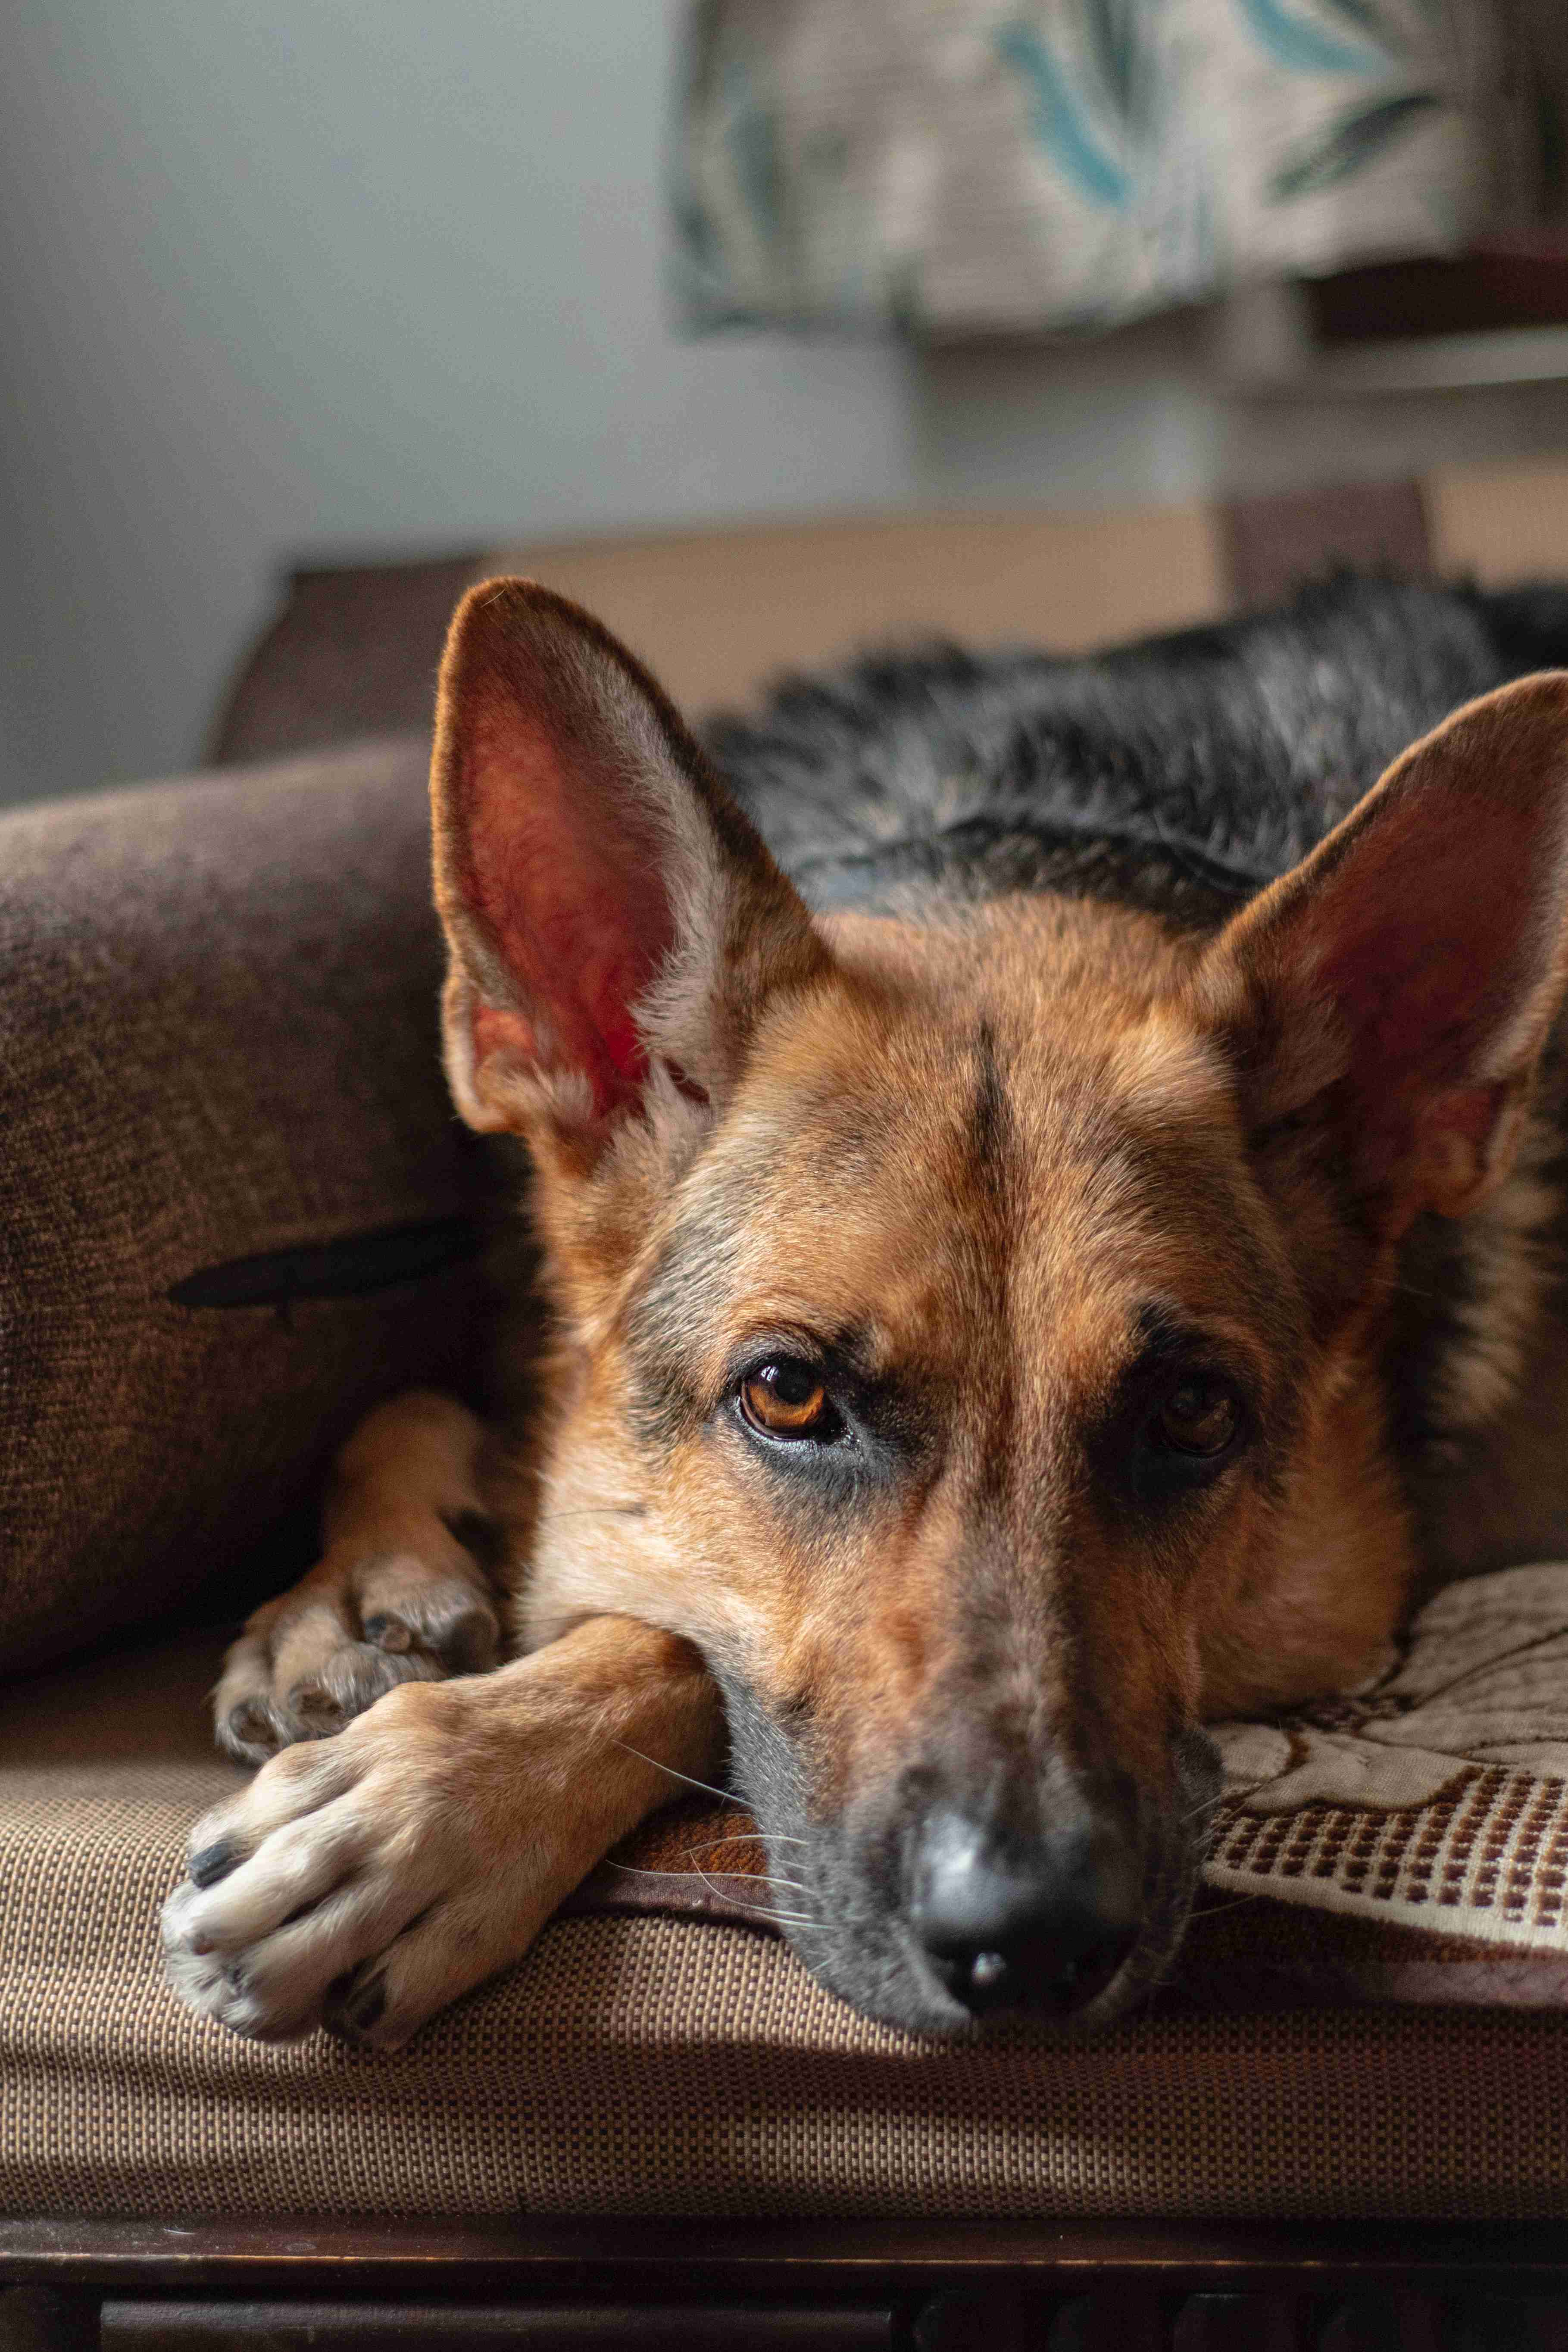 How do you prevent kennel cough in a German shepherd?